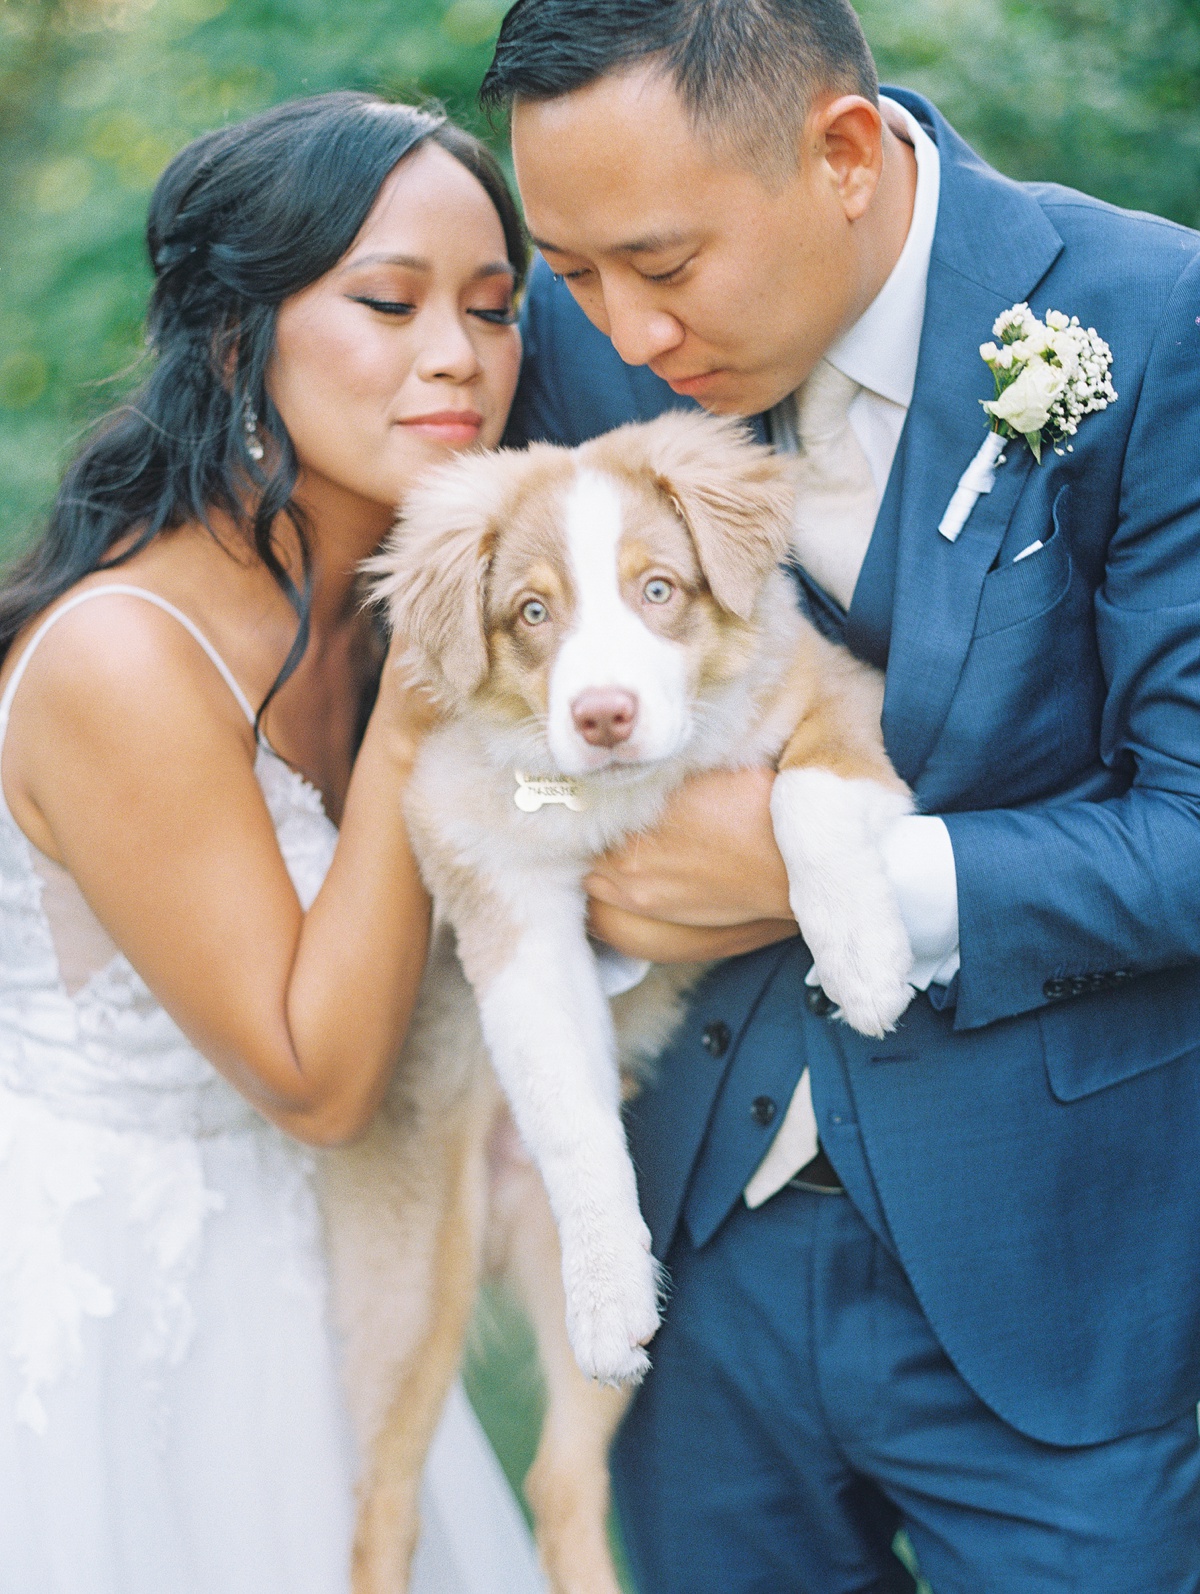 Wedding portrait with pet ideas | Wedding portrait inspiration | Shot by light and airy San Diego Wedding Photographer, Mandy Ford